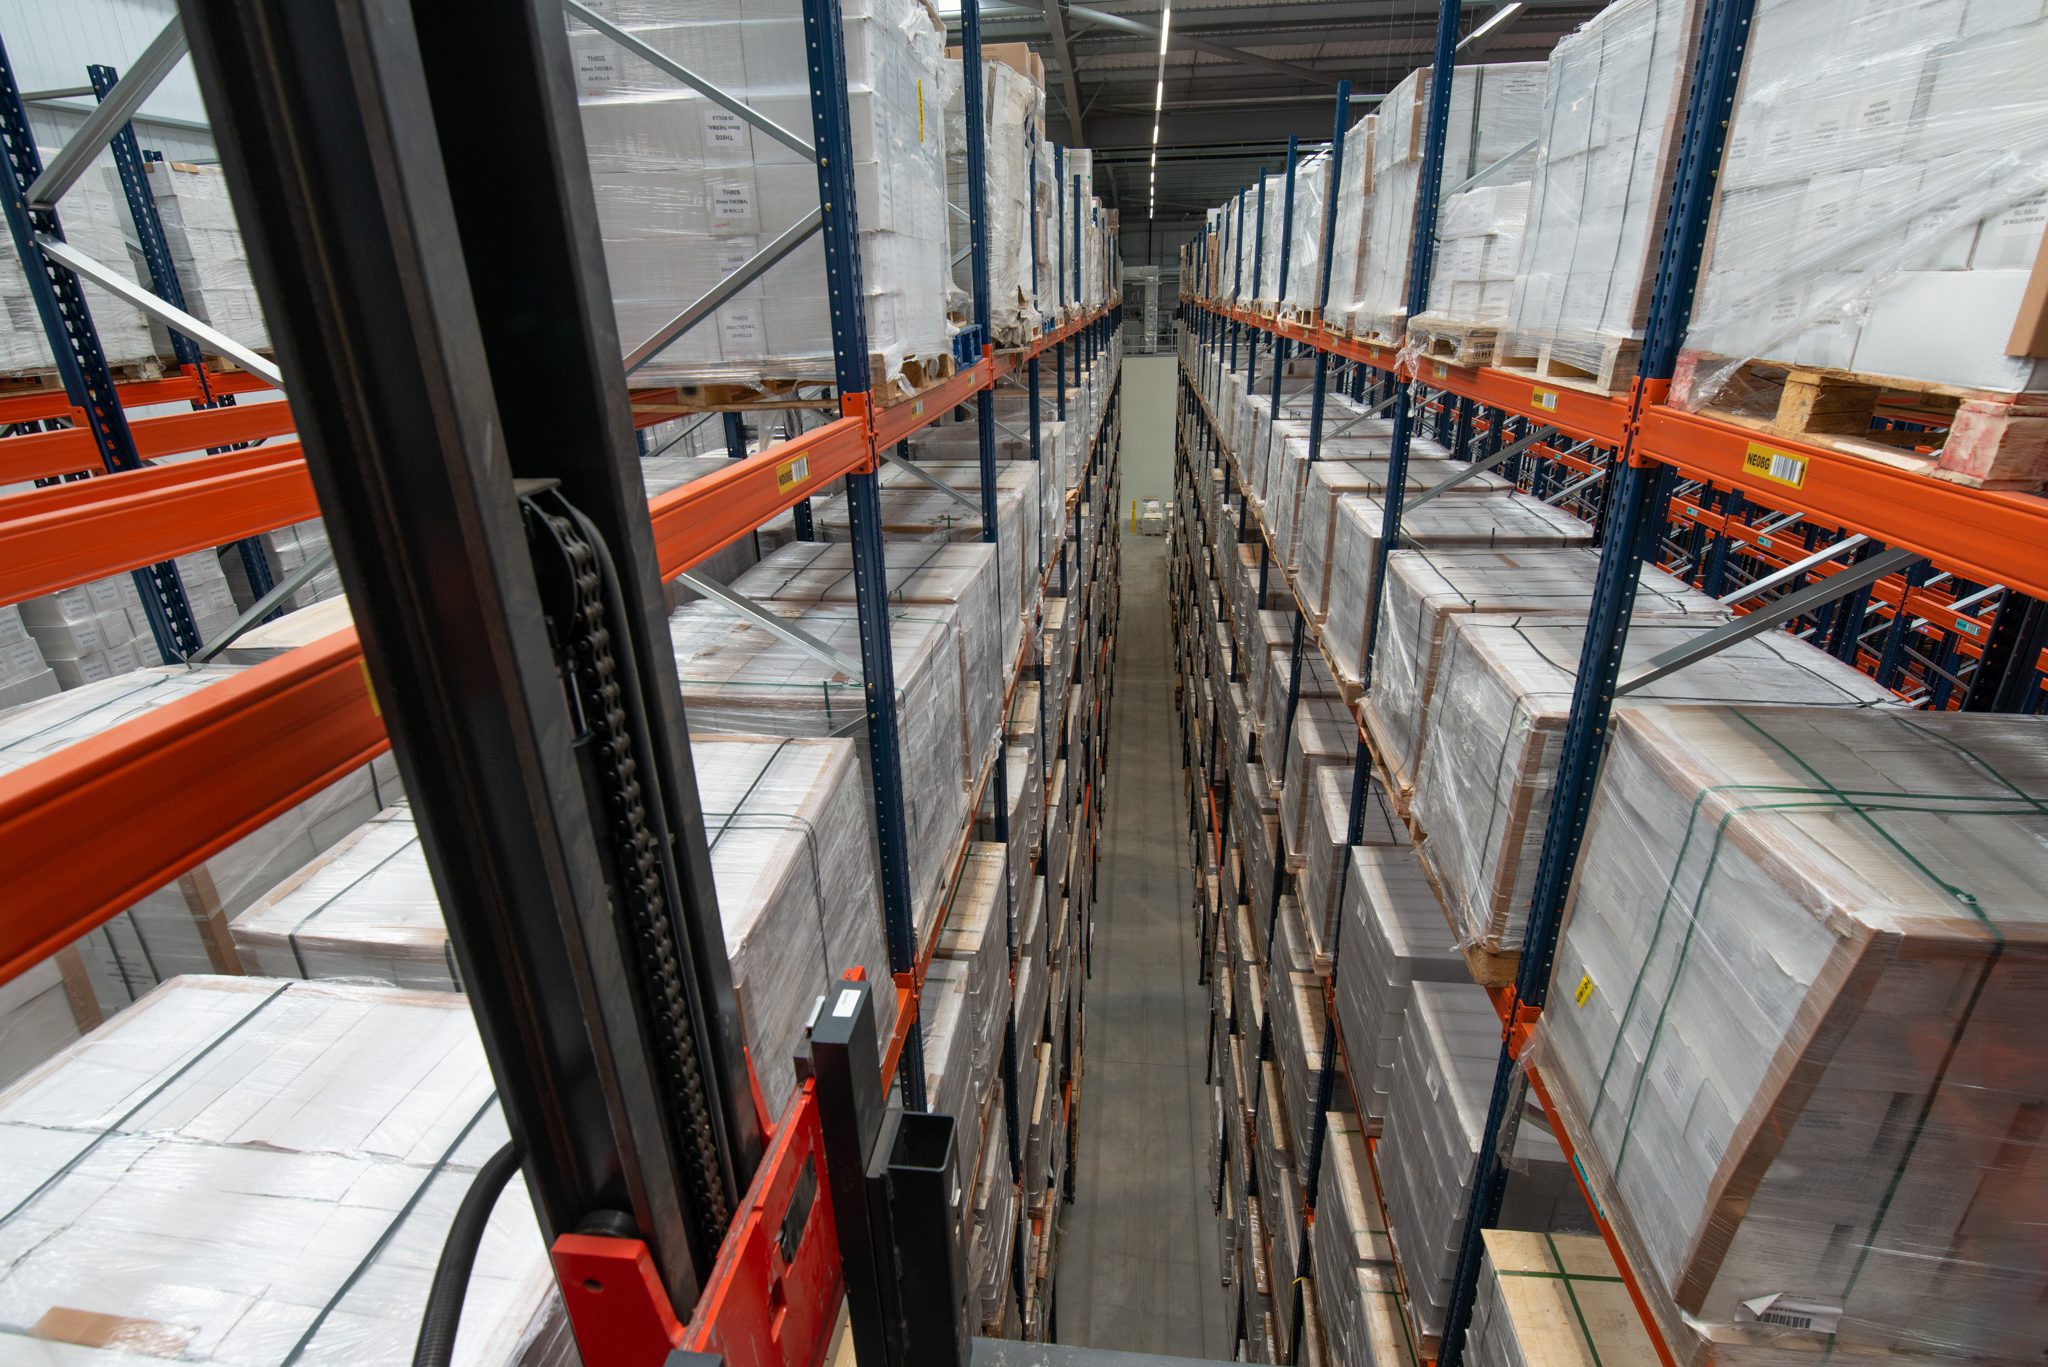 A picture of pallets in racking, taken from a VNA truck in LTS's Warehouse.